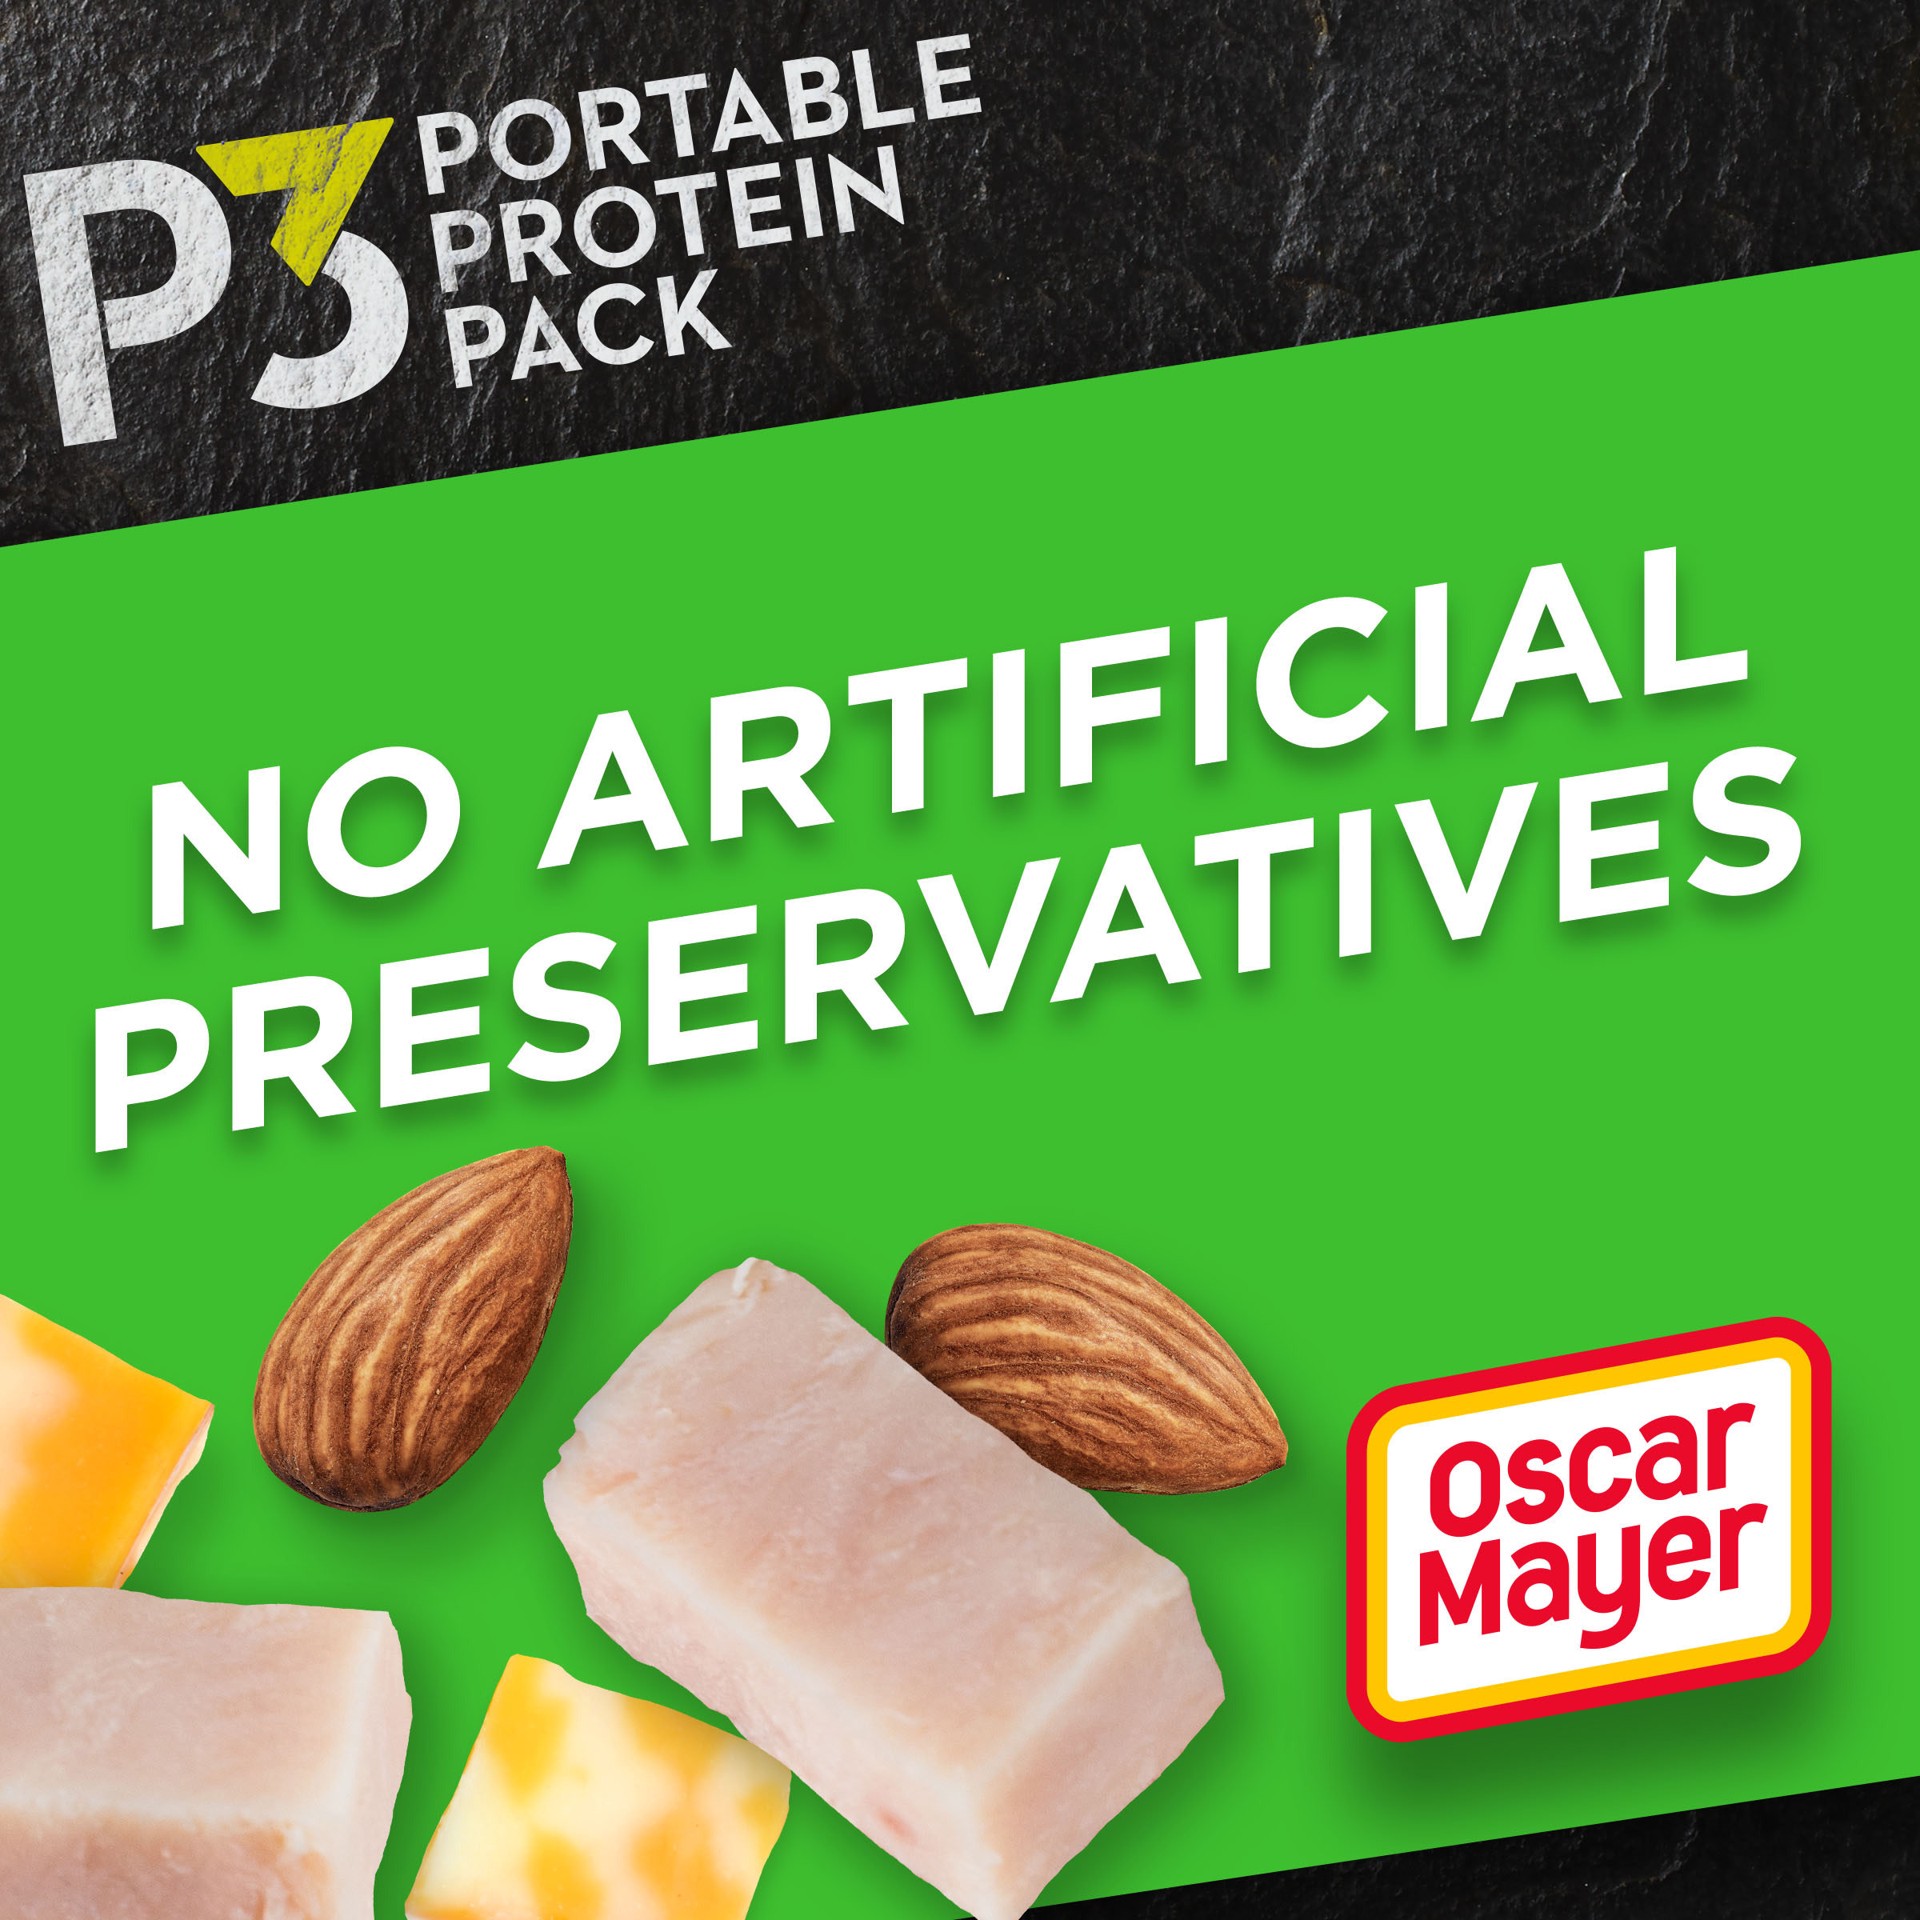 slide 3 of 5, P3 Portable Protein Snack Pack with Turkey, Almonds & Colby Jack Cheese, 5 ct Box, 2 oz Trays, 10 oz